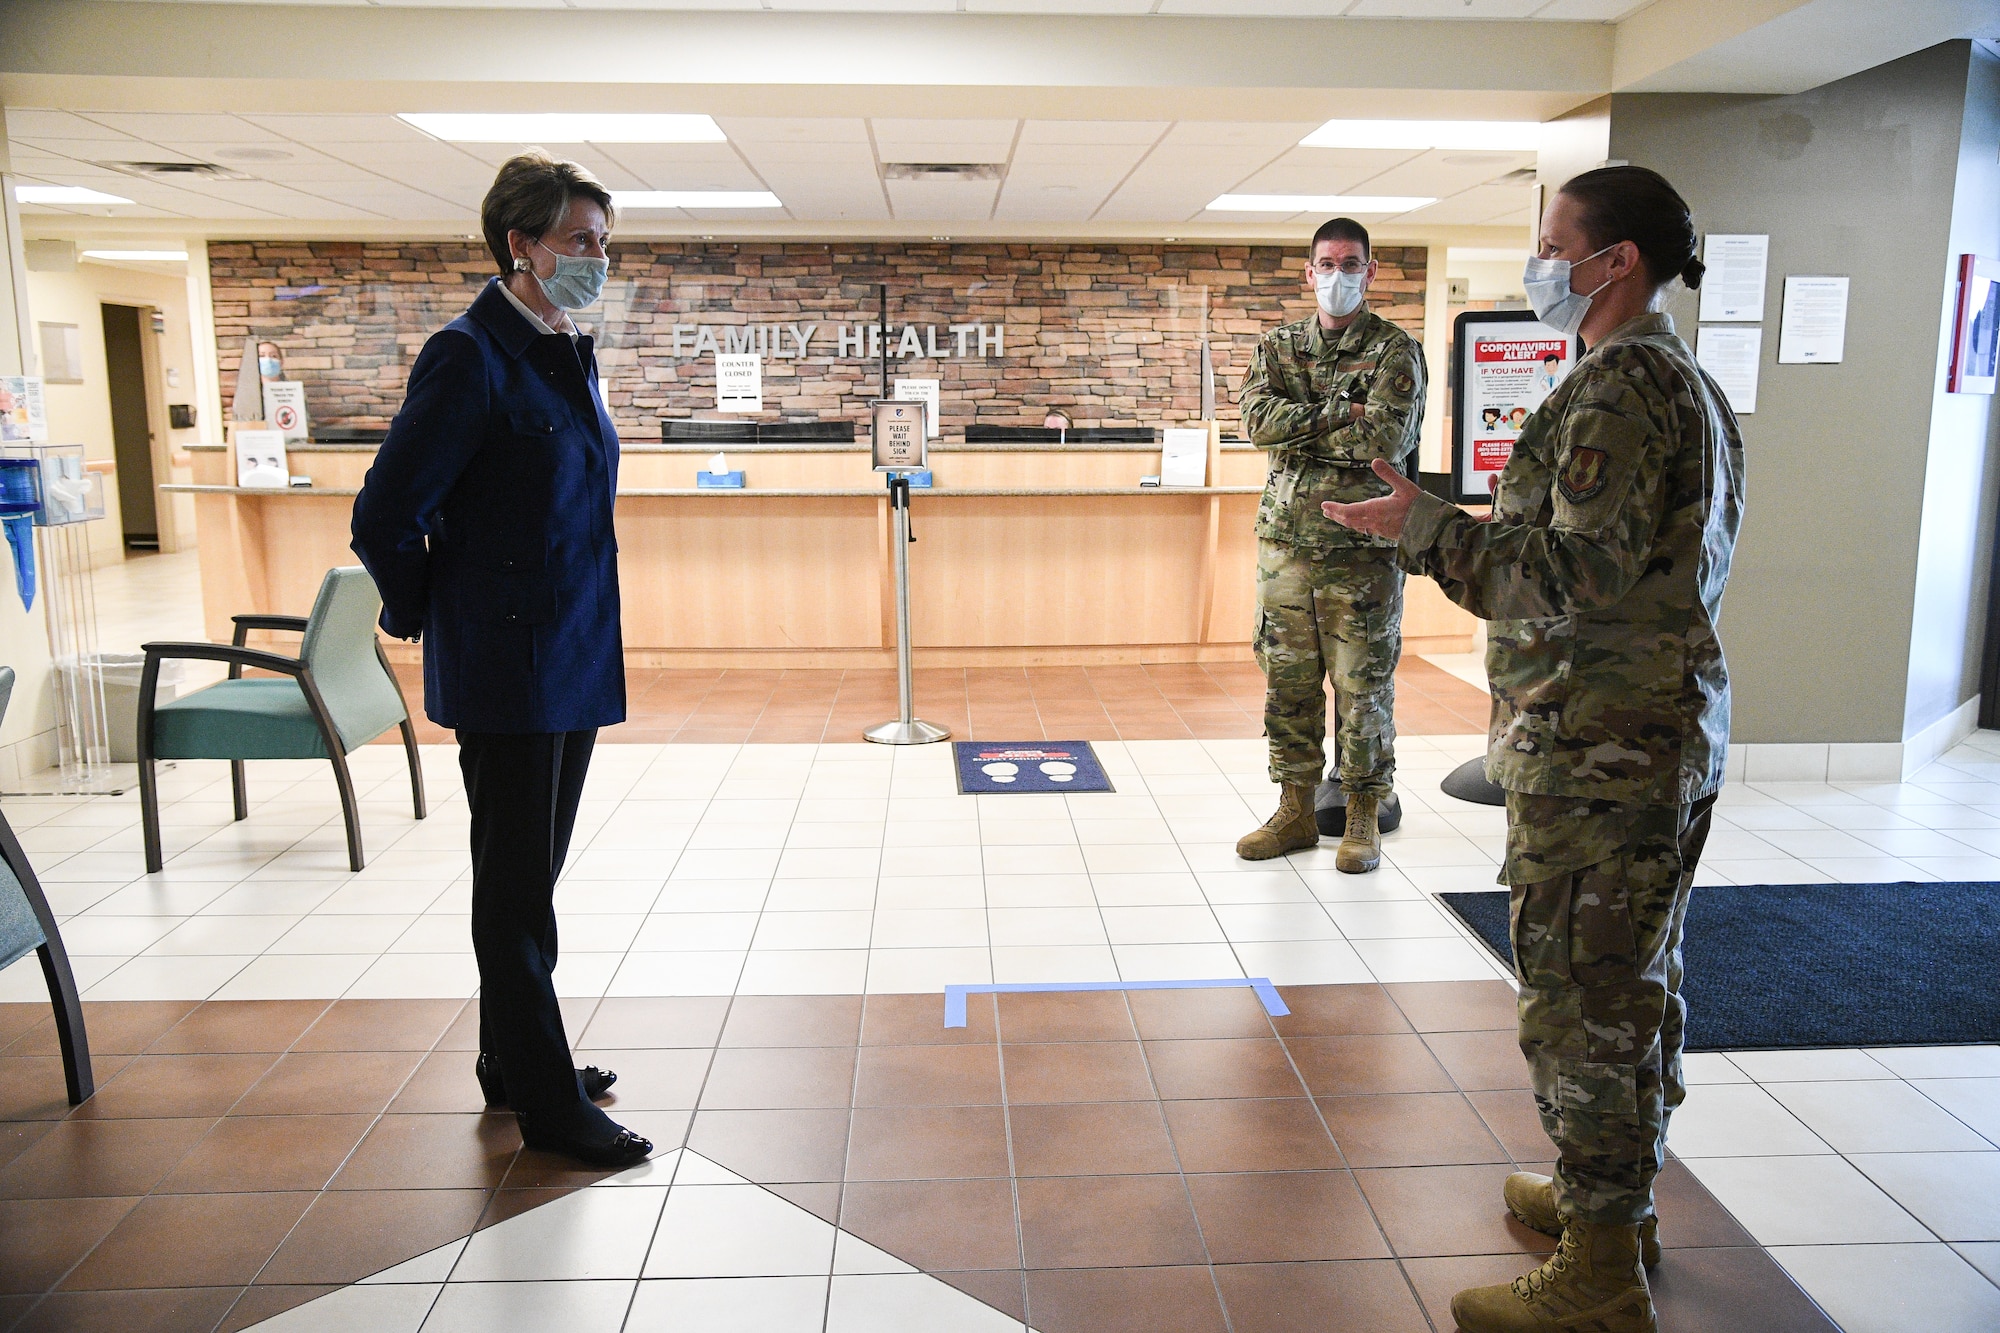 Secretary of the Air Force Barbara Barrett listens to Lt. Col. Jennifer Hardos, 75th Medical Group, in the lobby of the medical clinic.